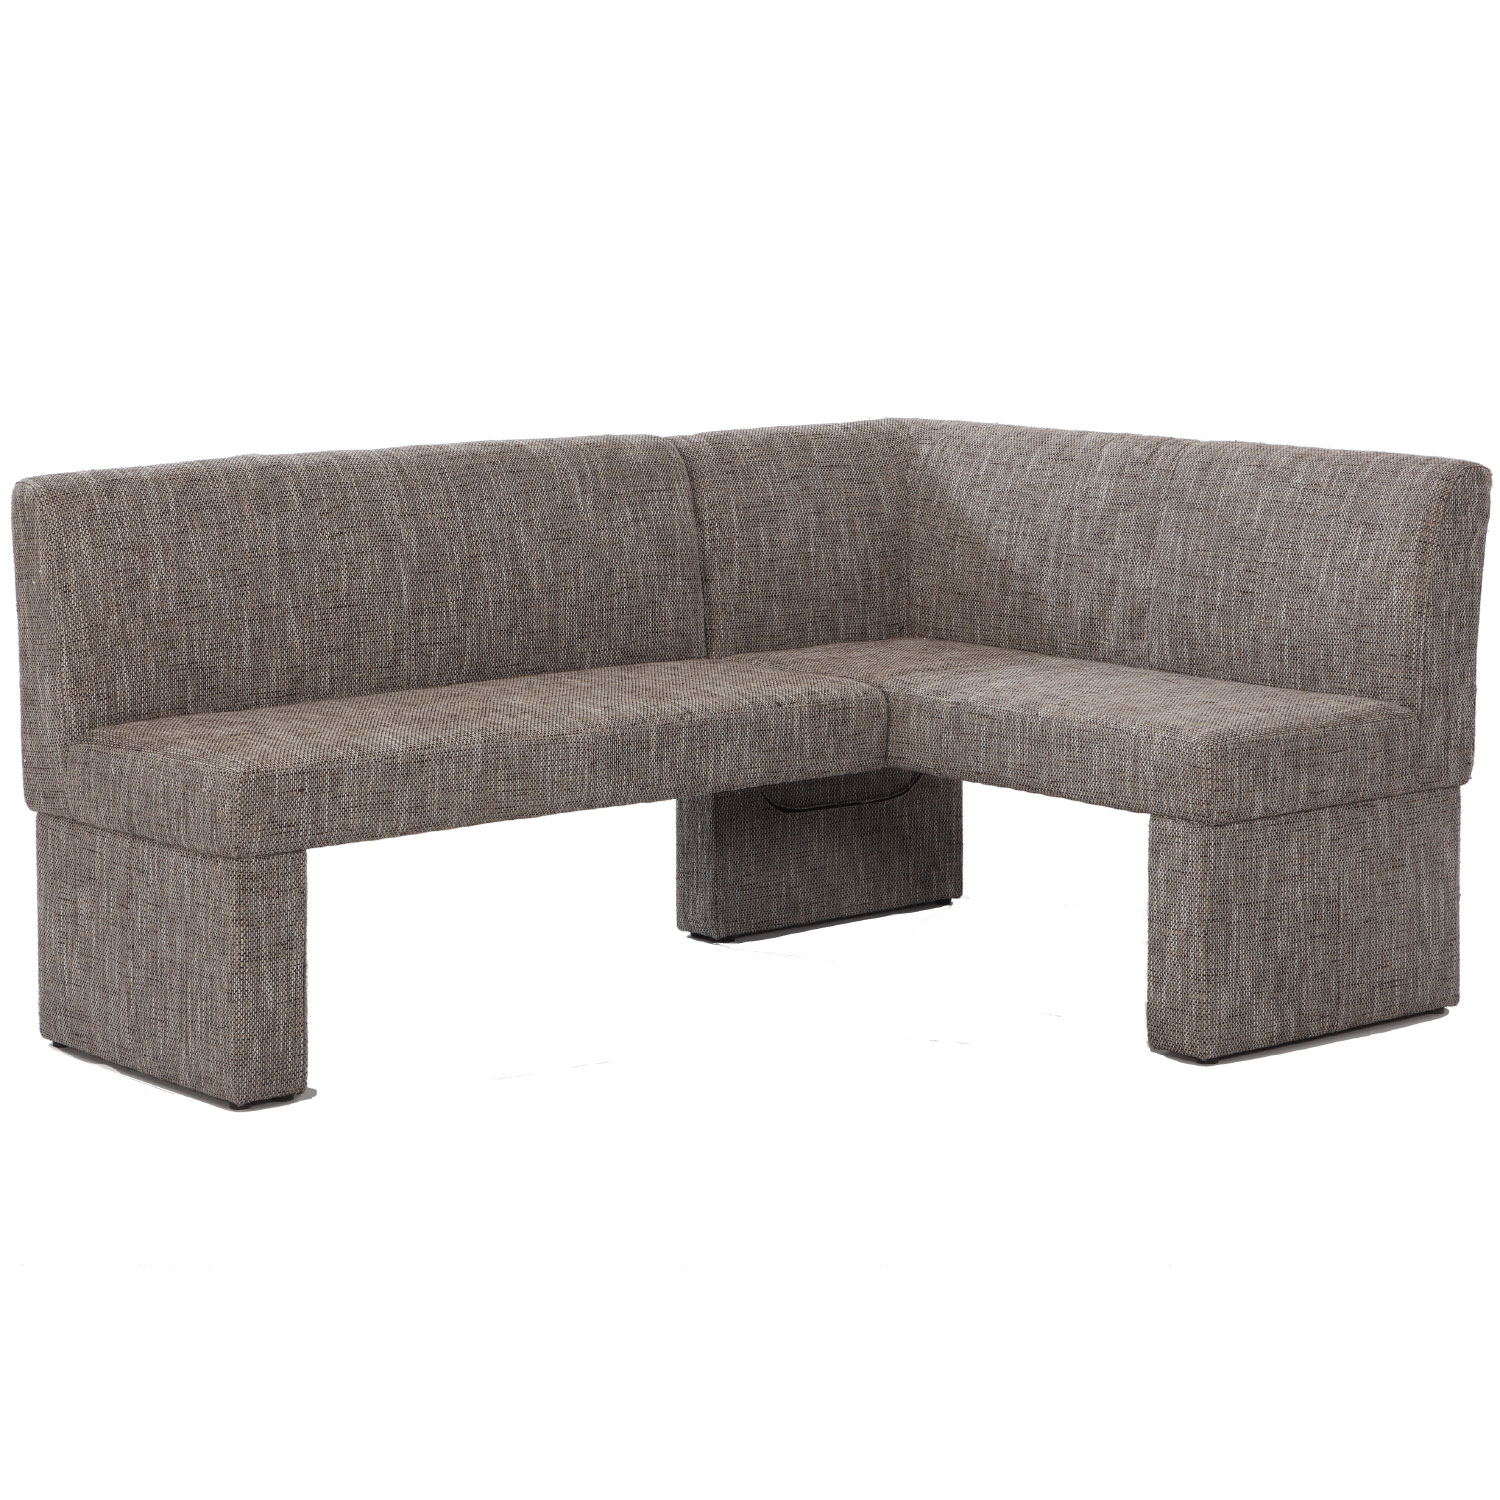 Labrenda Fully Upholstered Nook in Neutral Weave Fabric